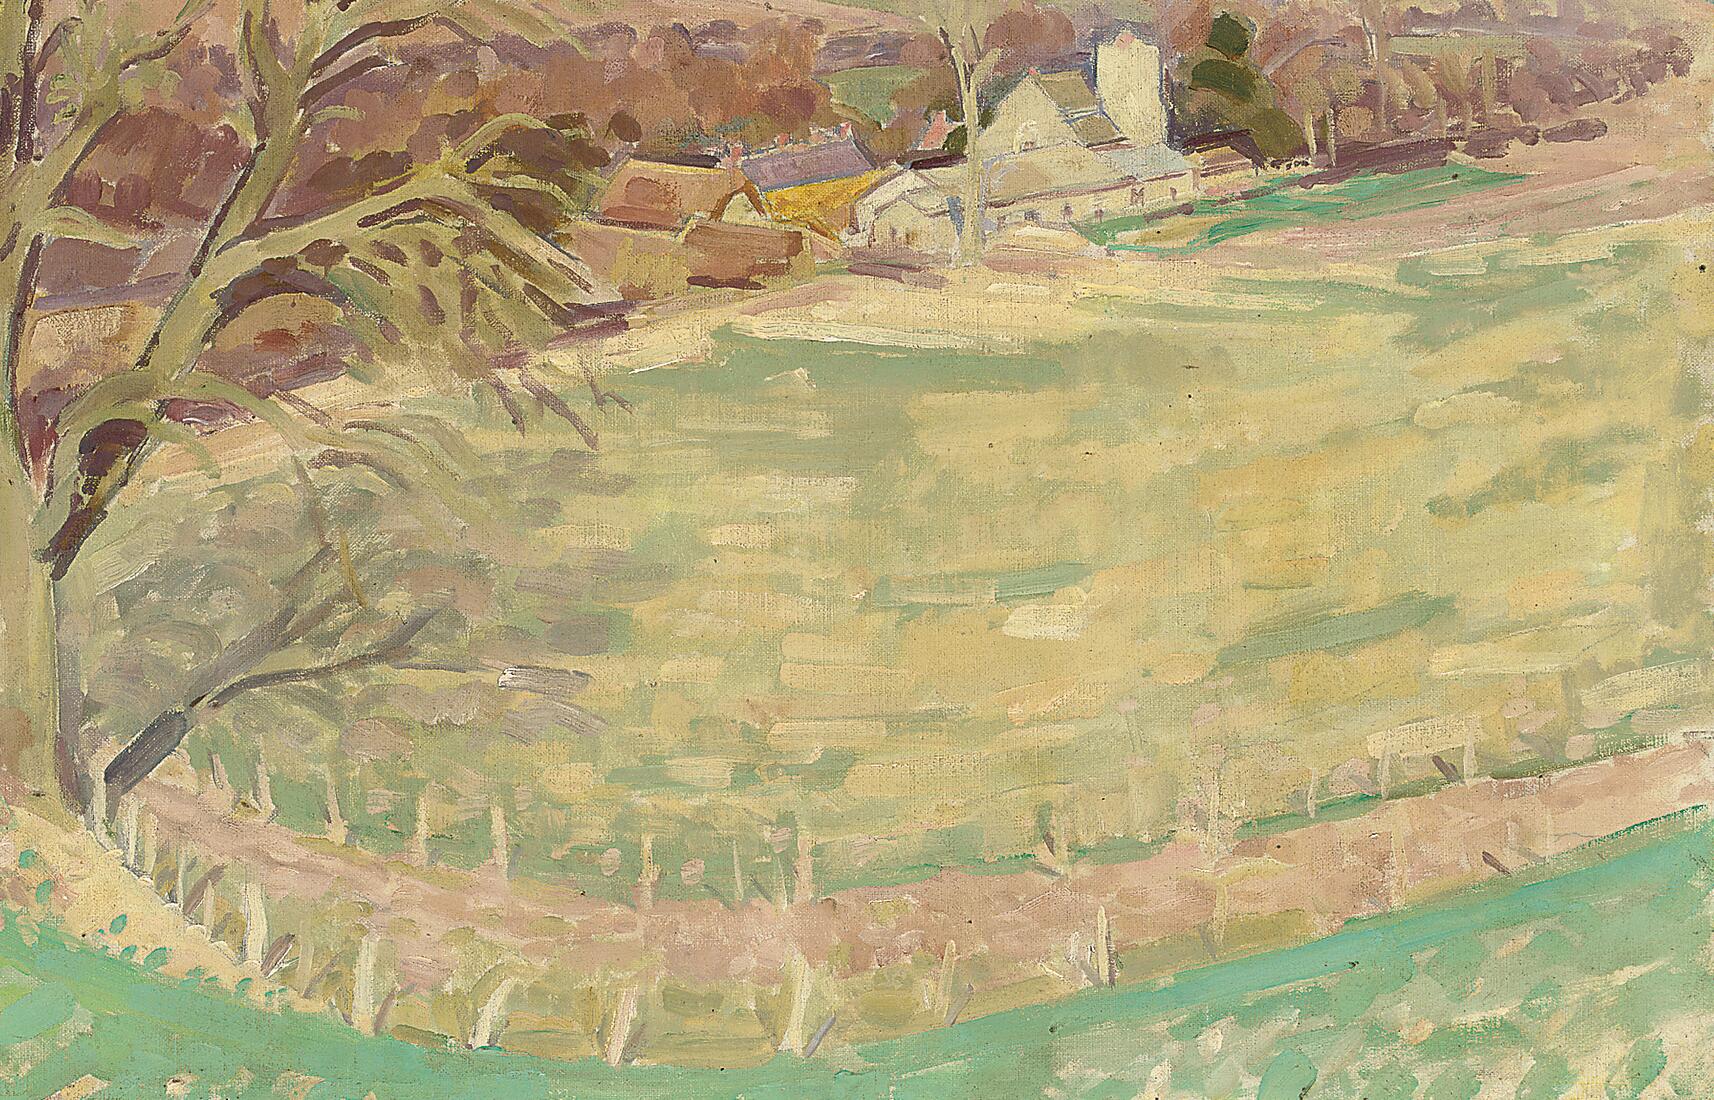 Henry Lamb, <i>Evening in the Village</i> [exhibited as <i>Wiltshire Village</i>], 1935, oil on canvas, 163 x 262 cm. Collection of Messums Wiltshire. Digital image courtesy of Messums Wiltshire.